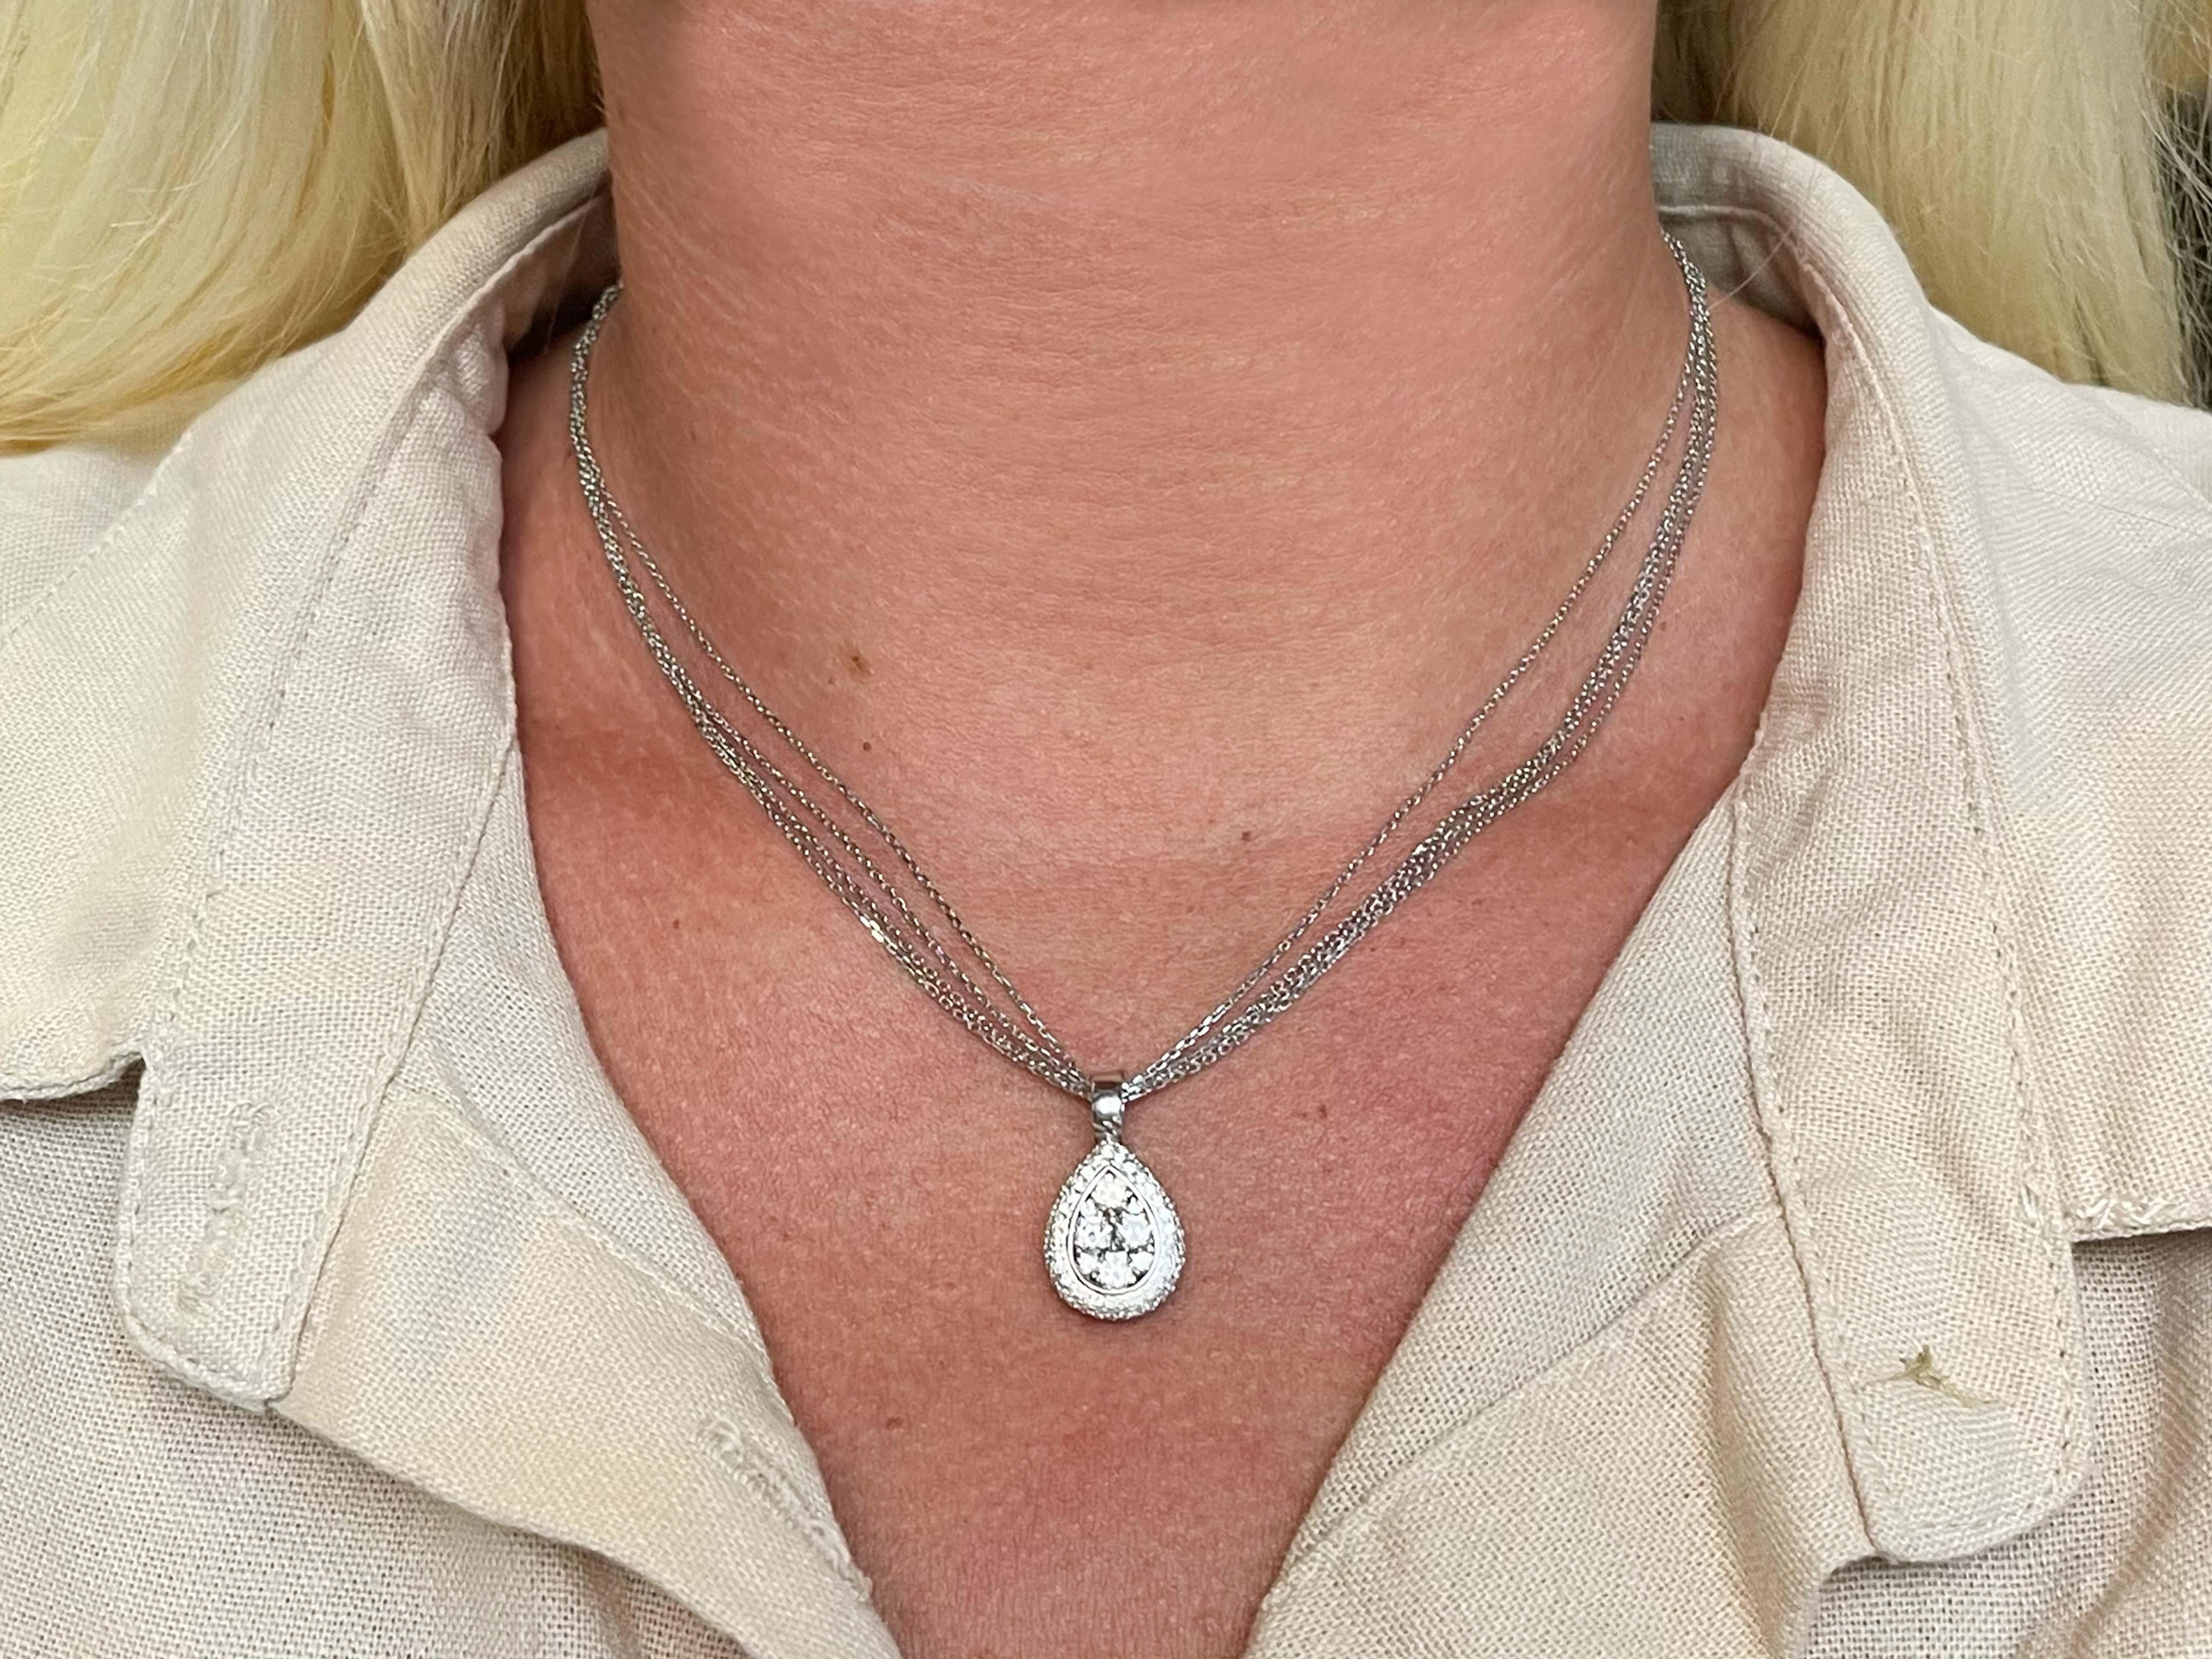 Item Specifications:

Necklace Metal: 14k (chain) and 18k (pendant) White Gold

Total Weight: 10 Grams

Chain Length: 18